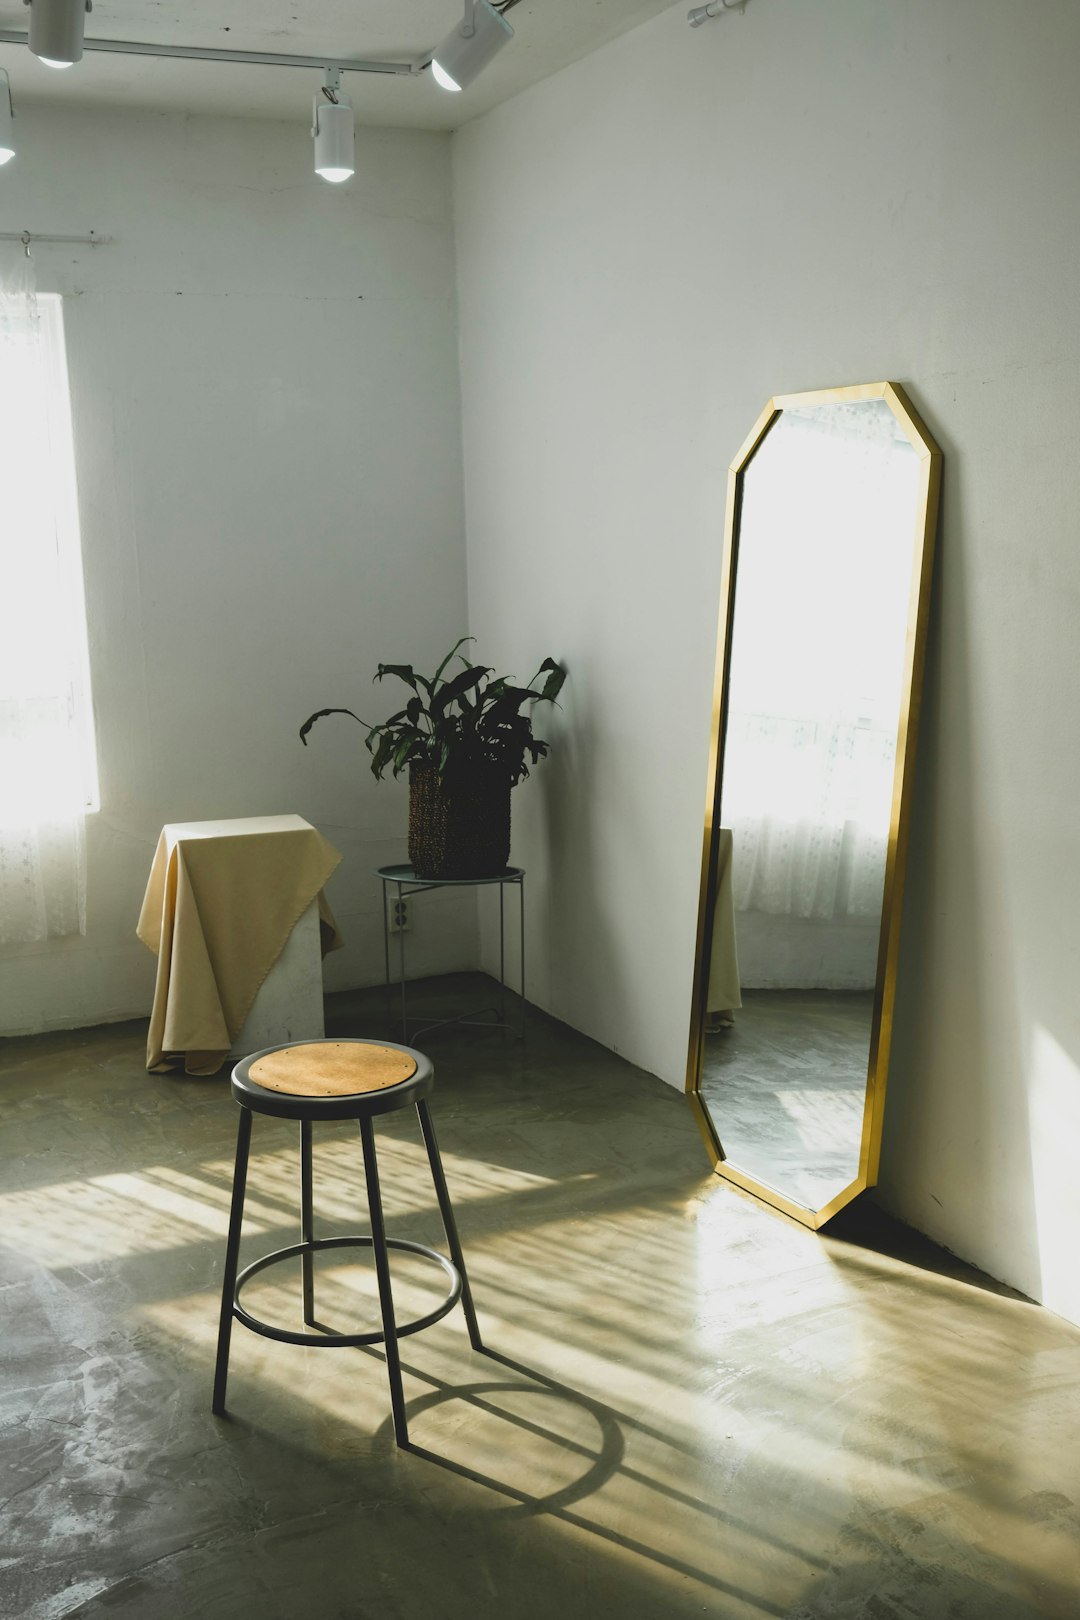 round brown wooden stool near leaning mirror